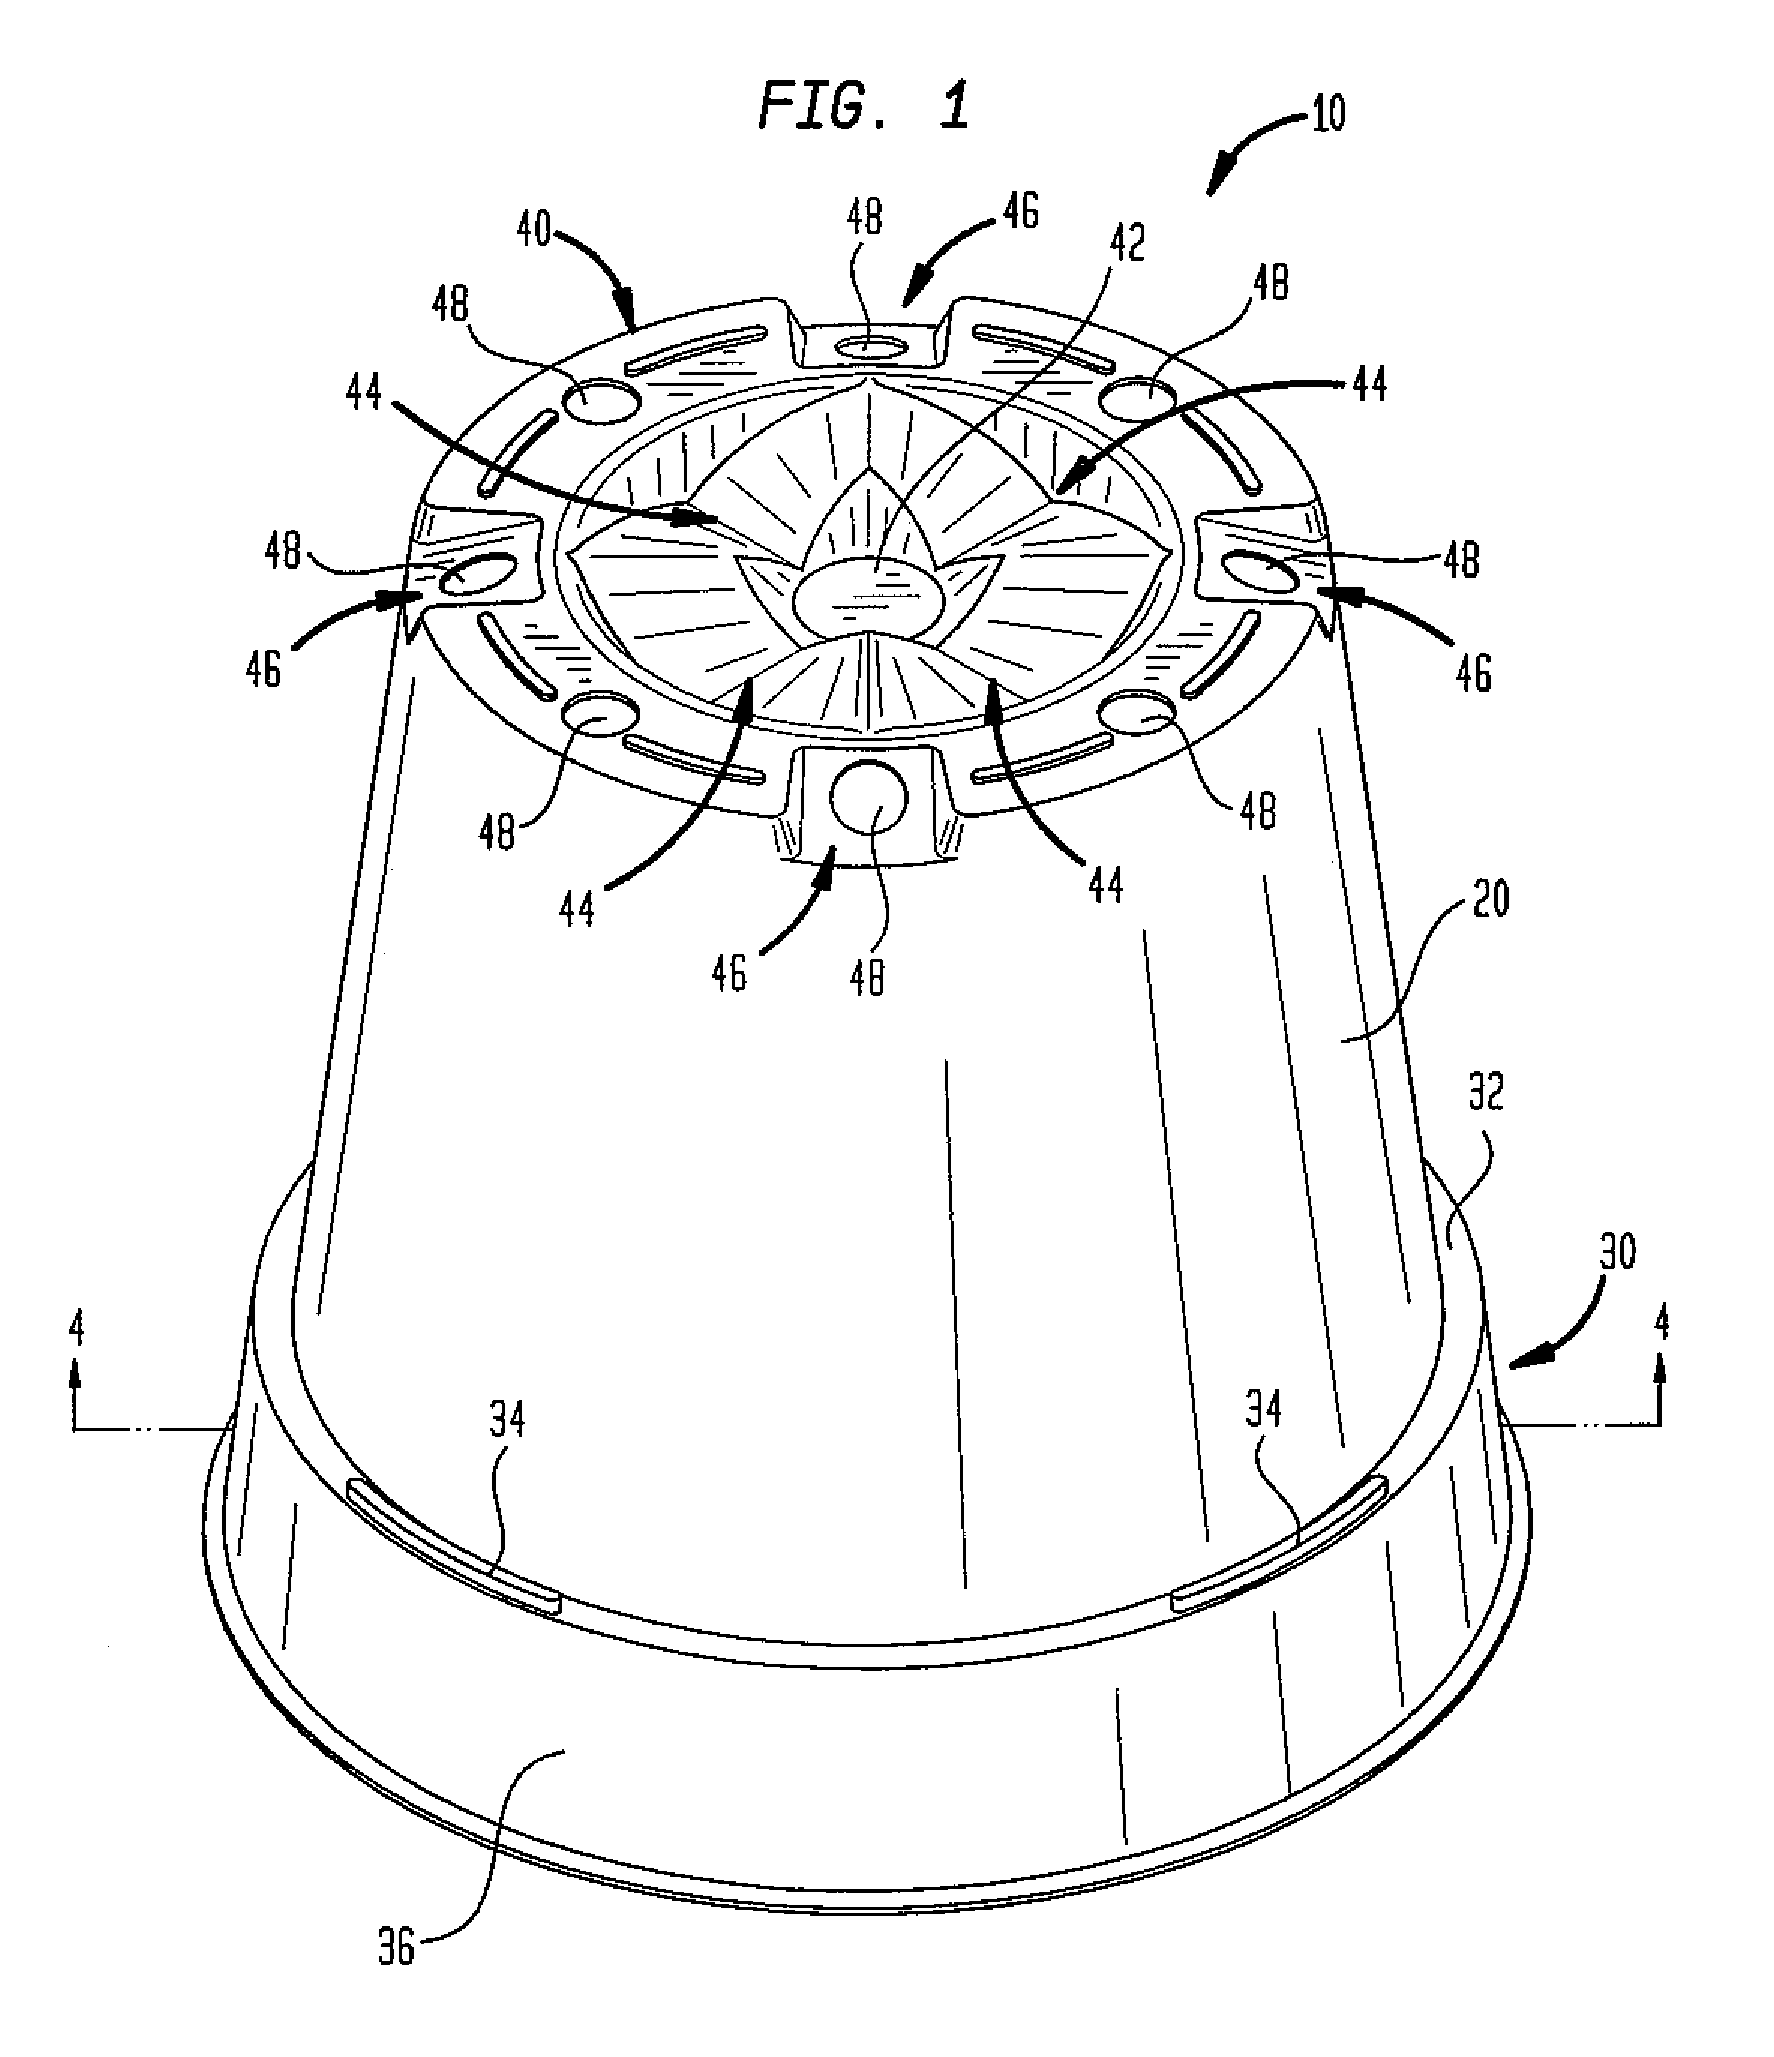 Planting pots and multi-compartment tray having self-orienting configuration